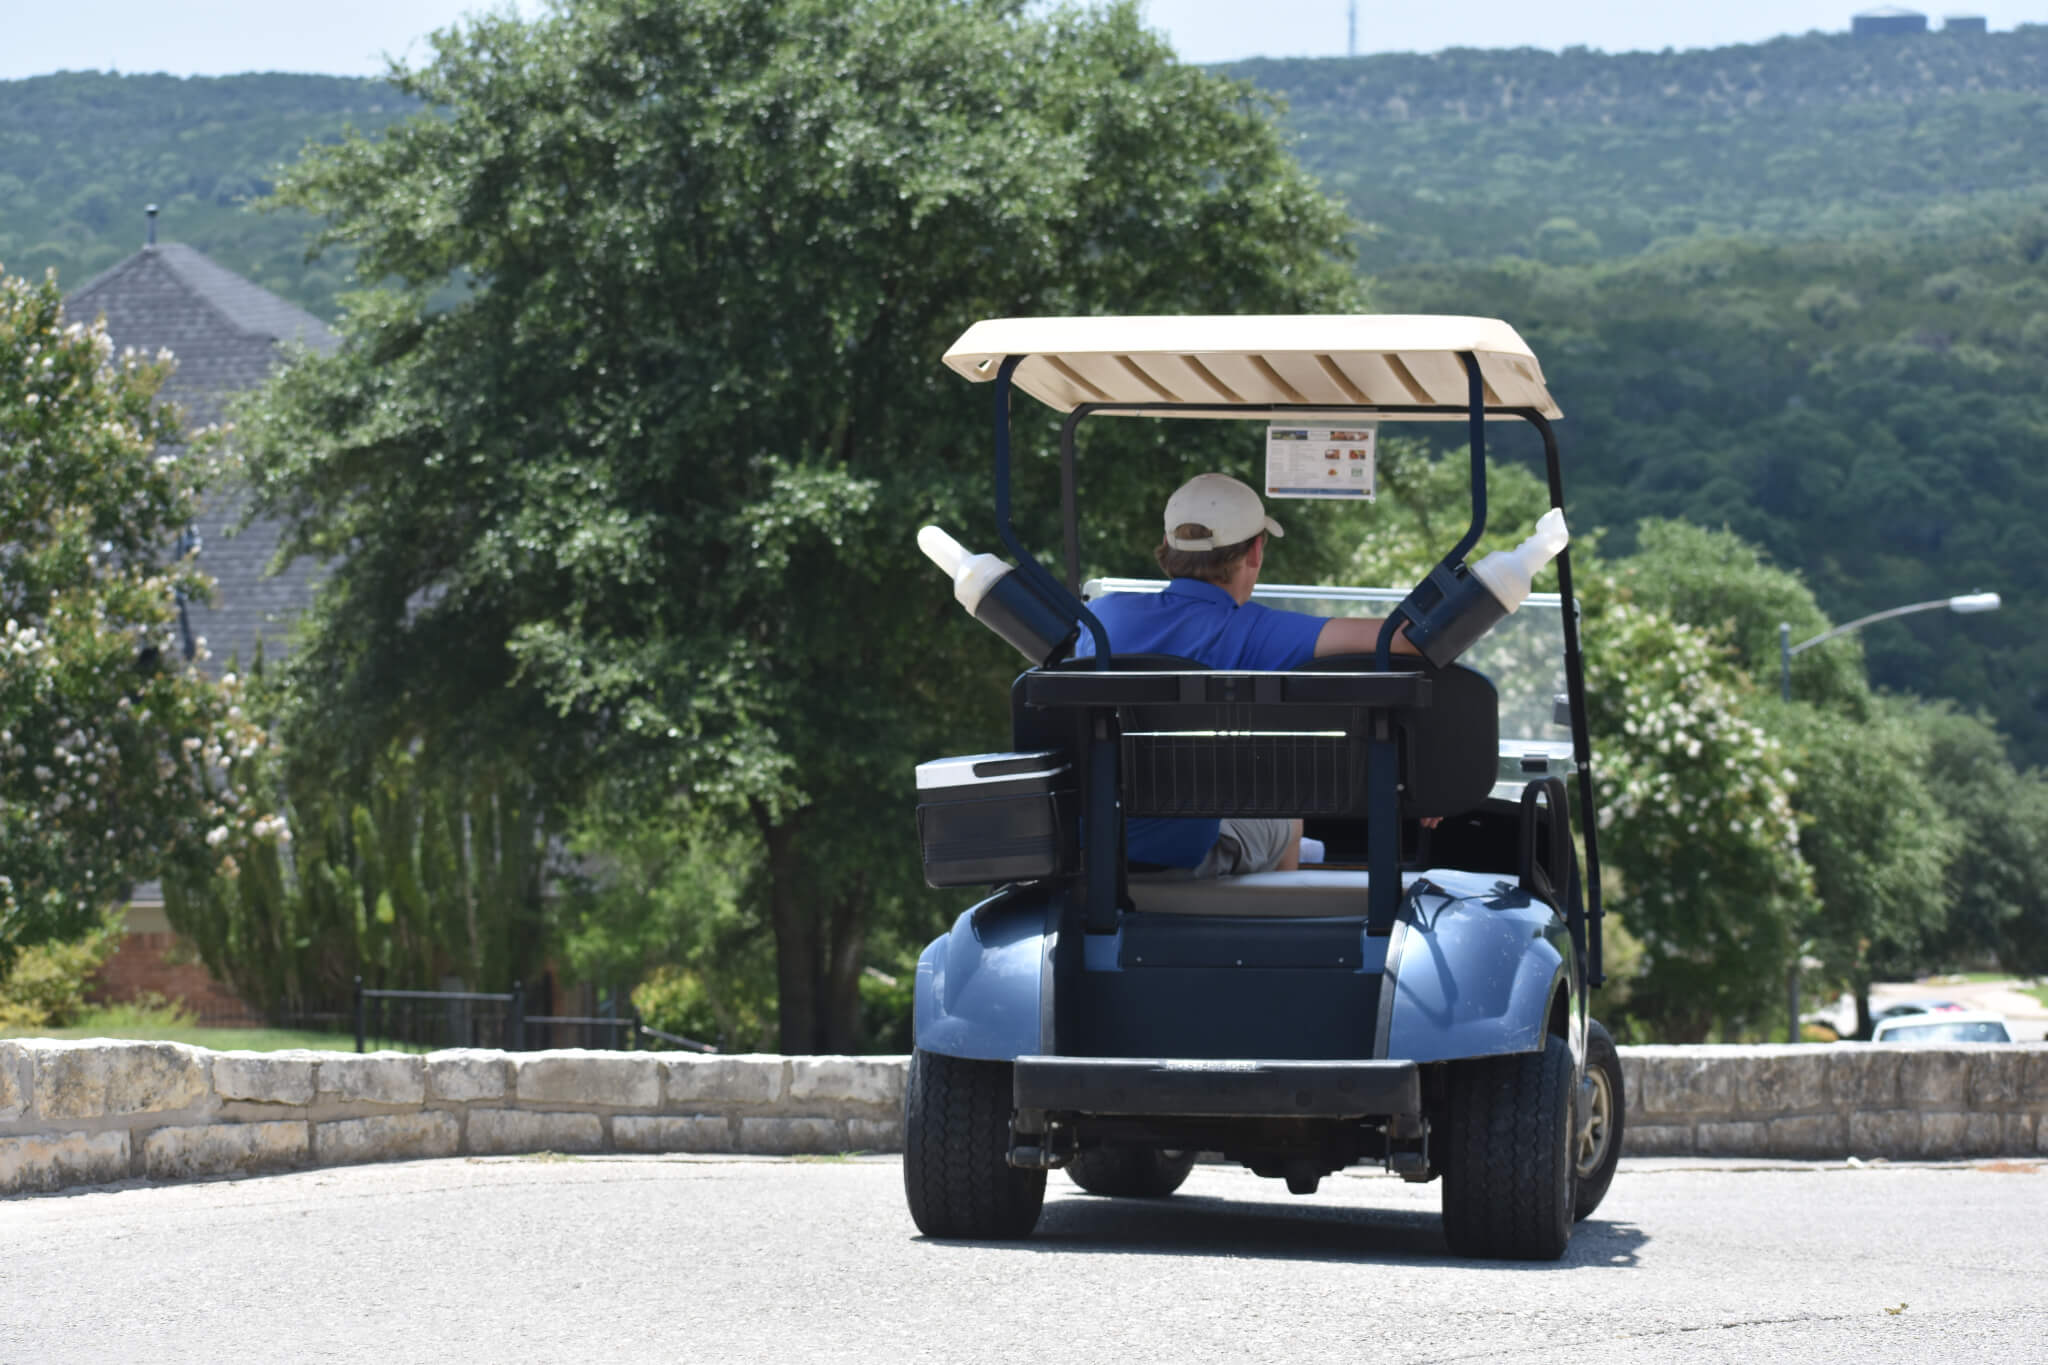 Rules on golf cart usage vary in Four Points - Four Points News